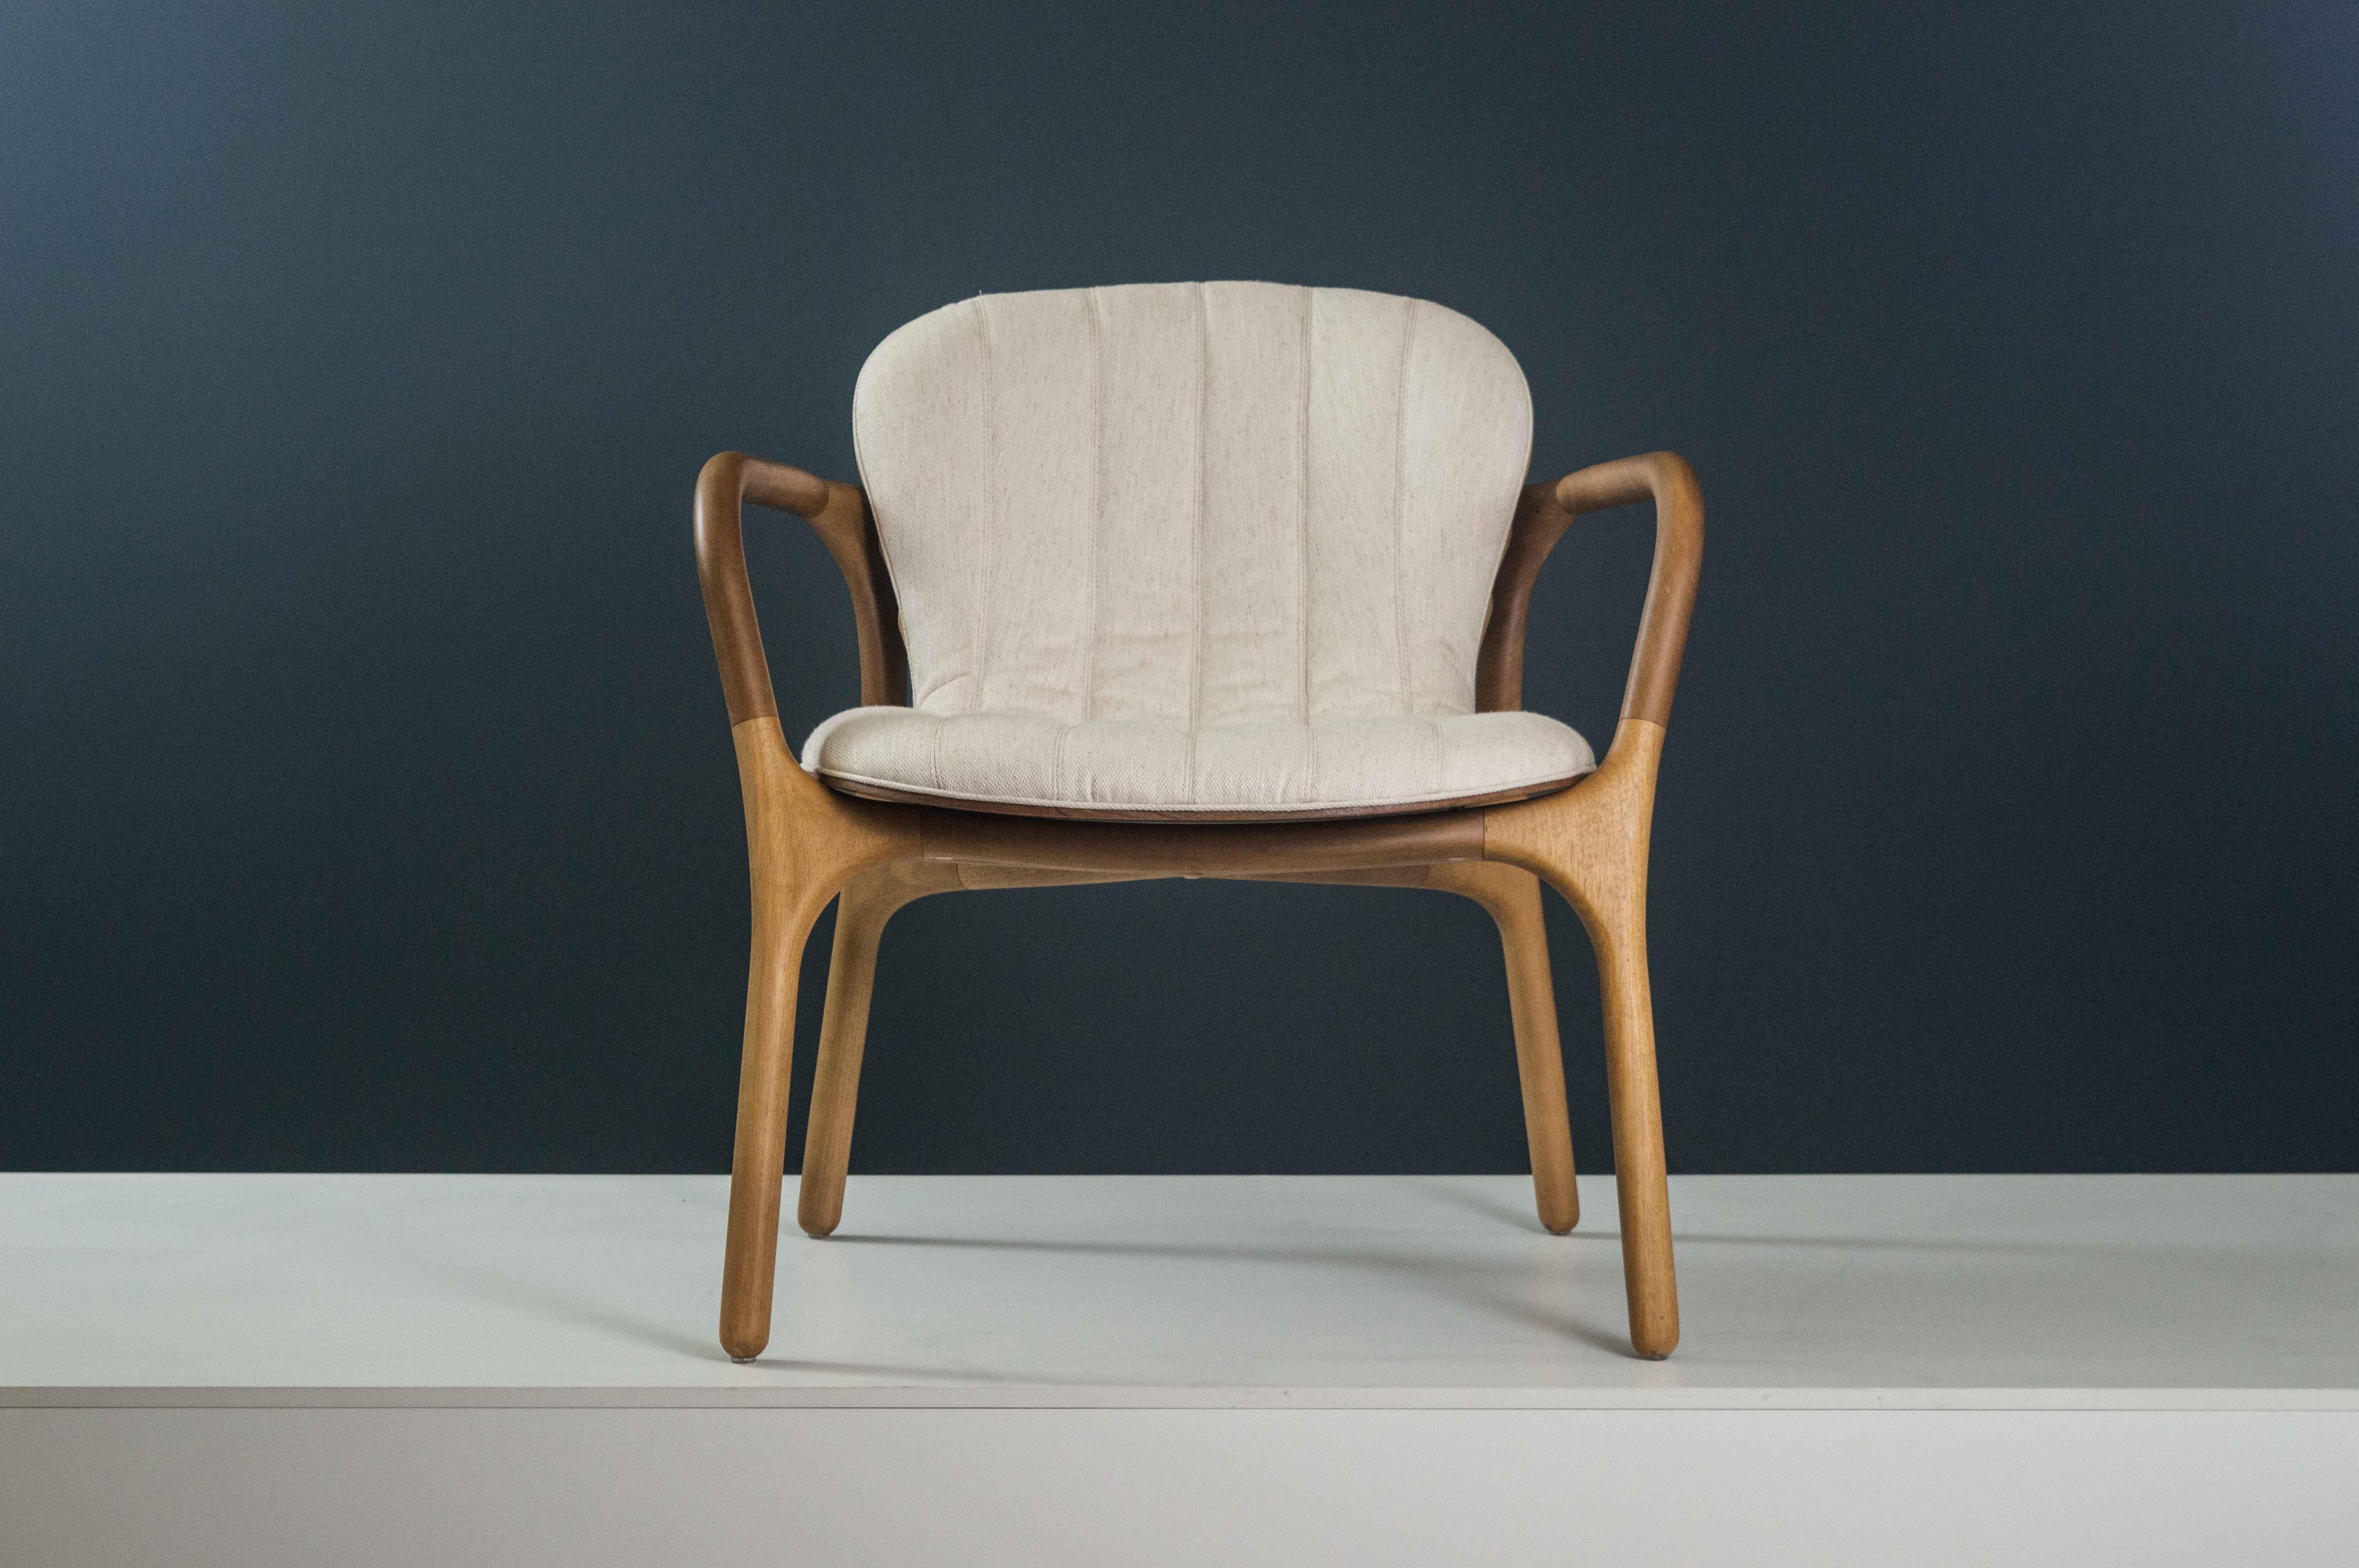 Armchair with wooden structure and upholstered seat. The first sketches of the Coral Line, consisting of an armchair and a chair, start from the observation of marine life, shells and crustaceans.
The formal result seeks textures and shapes that